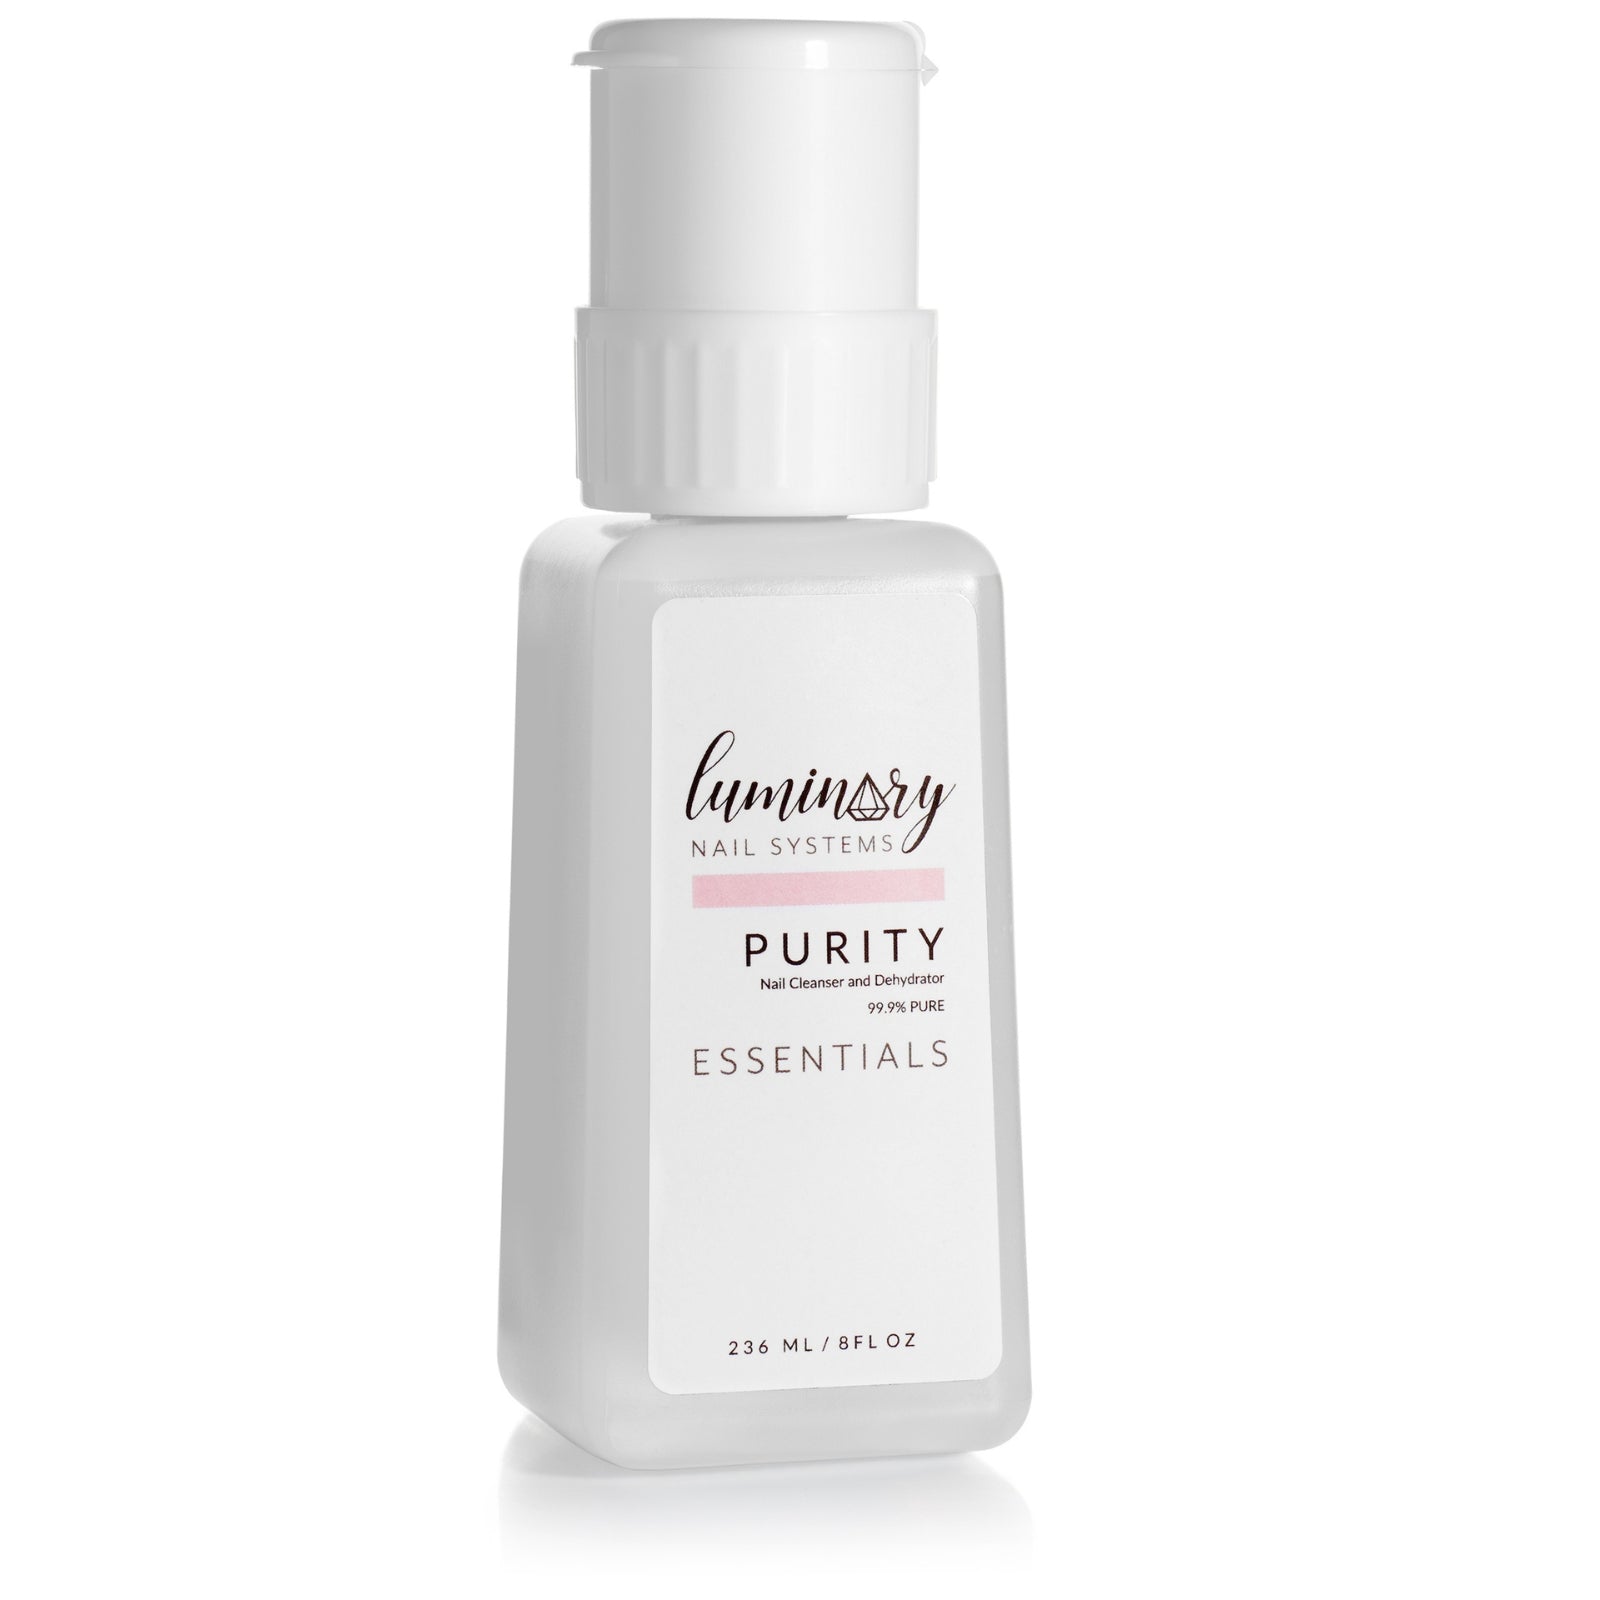 "Purity" Nail Cleanser and Dehydrator *NEW*